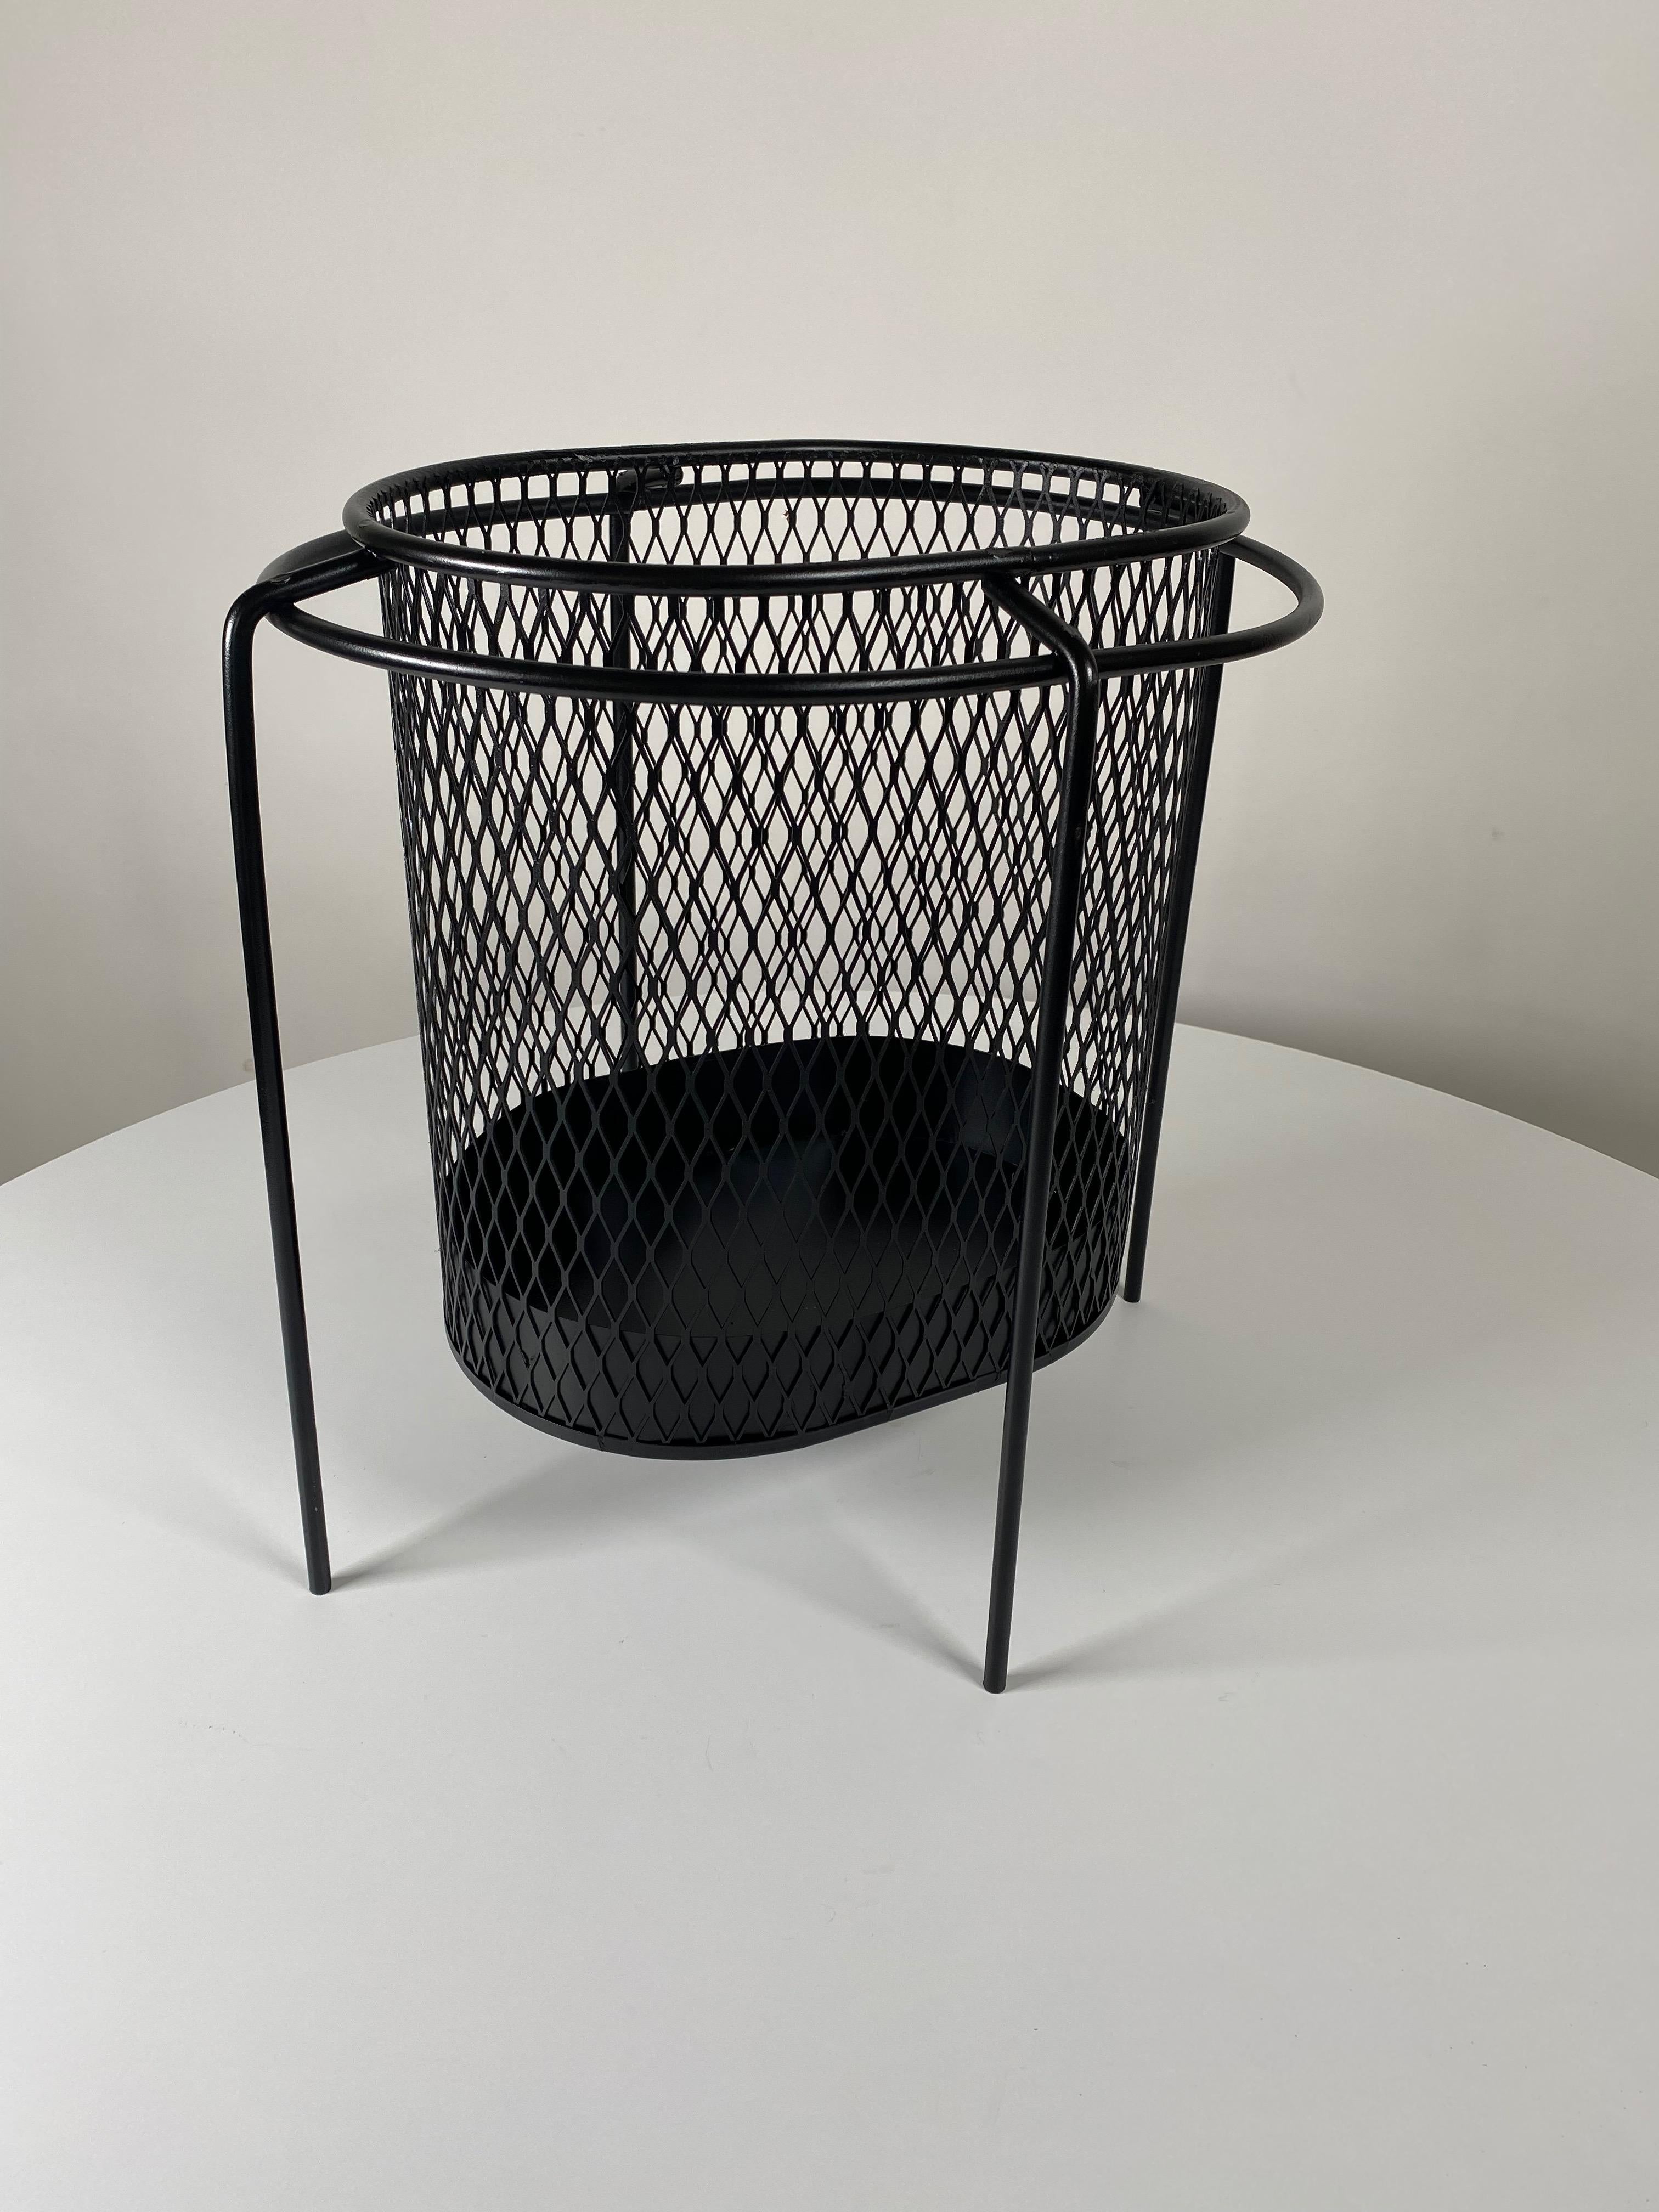 Expanded metal wastepaper basket by Industrial Designer Maurice Duchin in black, the basket is suspended by an oval ring attached to four bent metal legs. The Modernist take on the wastepaper basket as a design statement from the 1950s. Free